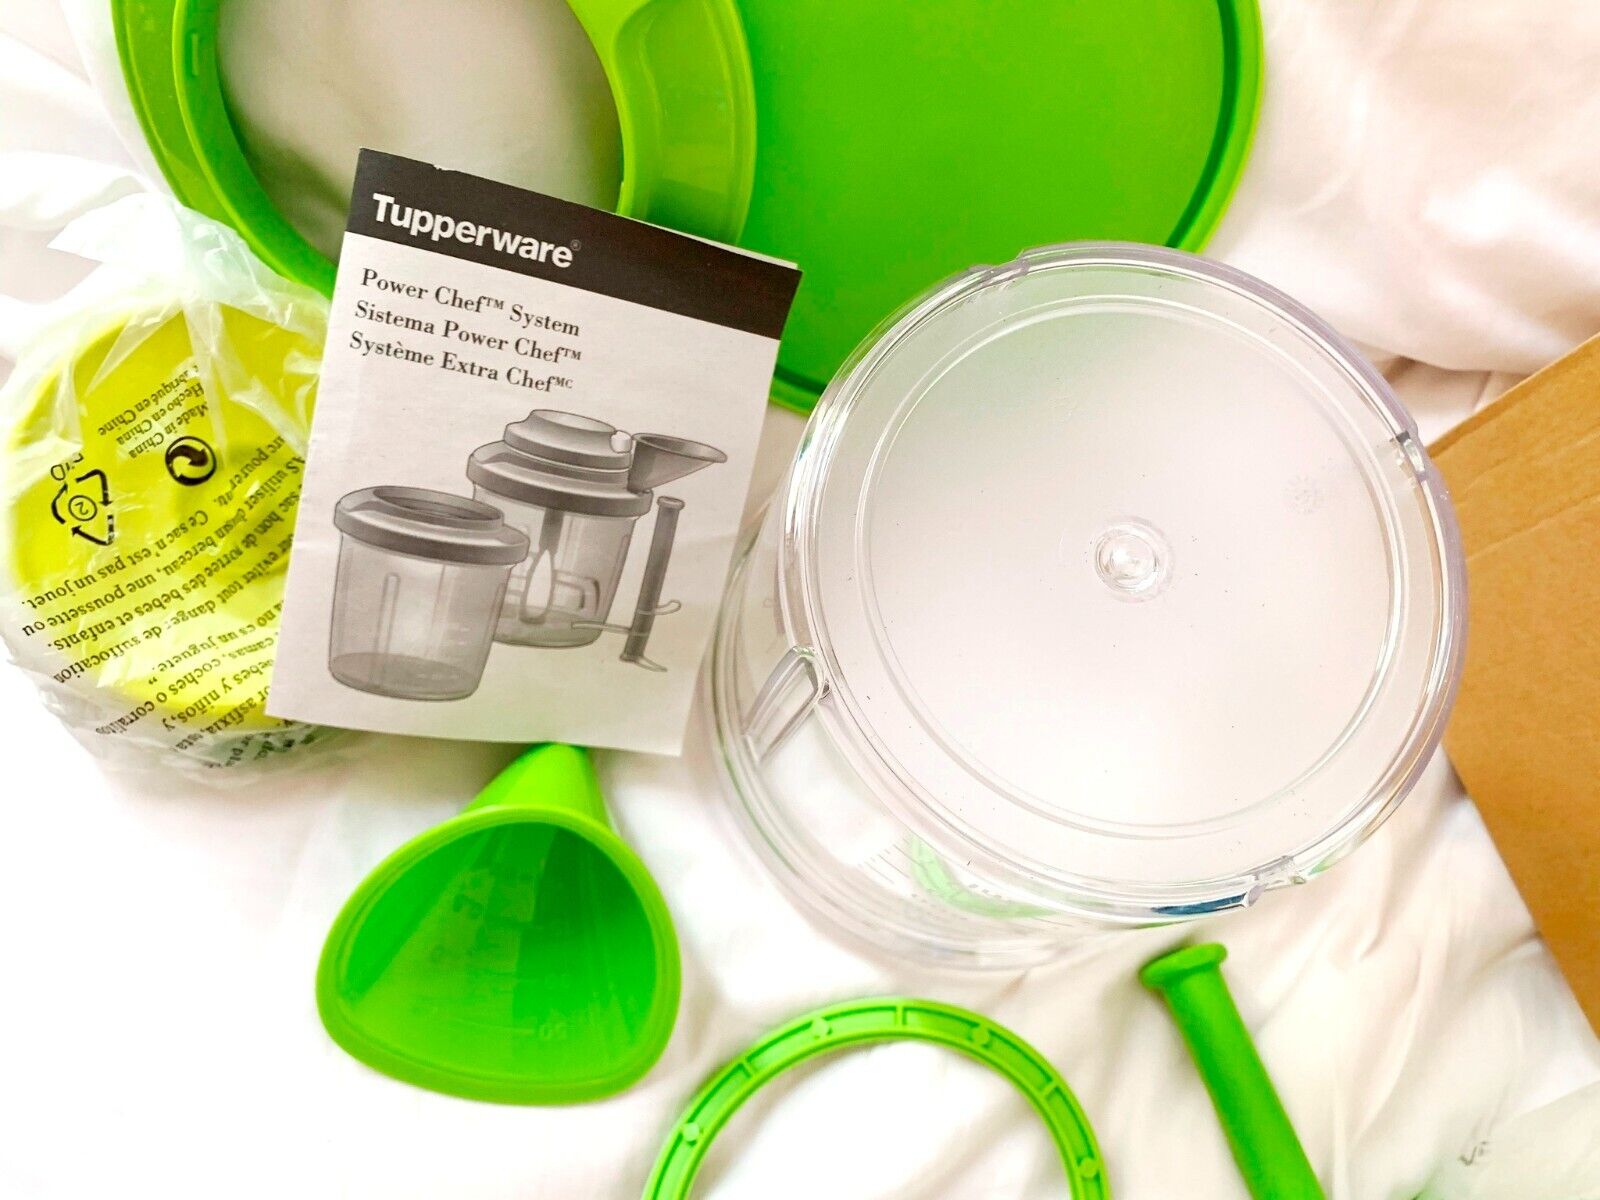 TUPPERWARE Power Chef System Extra Chef FOOD PROCESSOR 1.35L Green NEW in Box